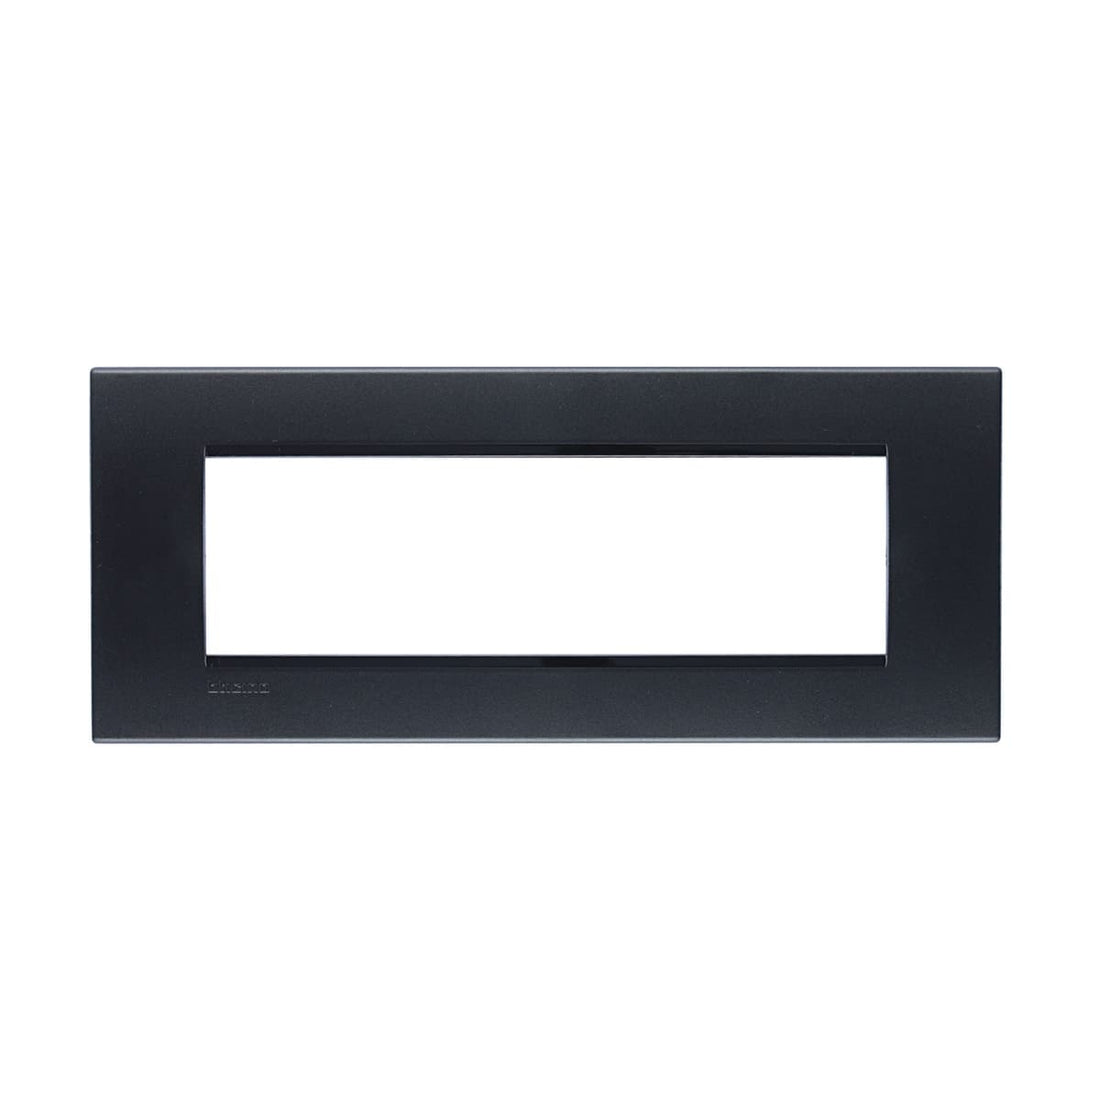 LIVING LIGHT PLATE 7 PLACES ANTHRACITE - best price from Maltashopper.com BR420000043